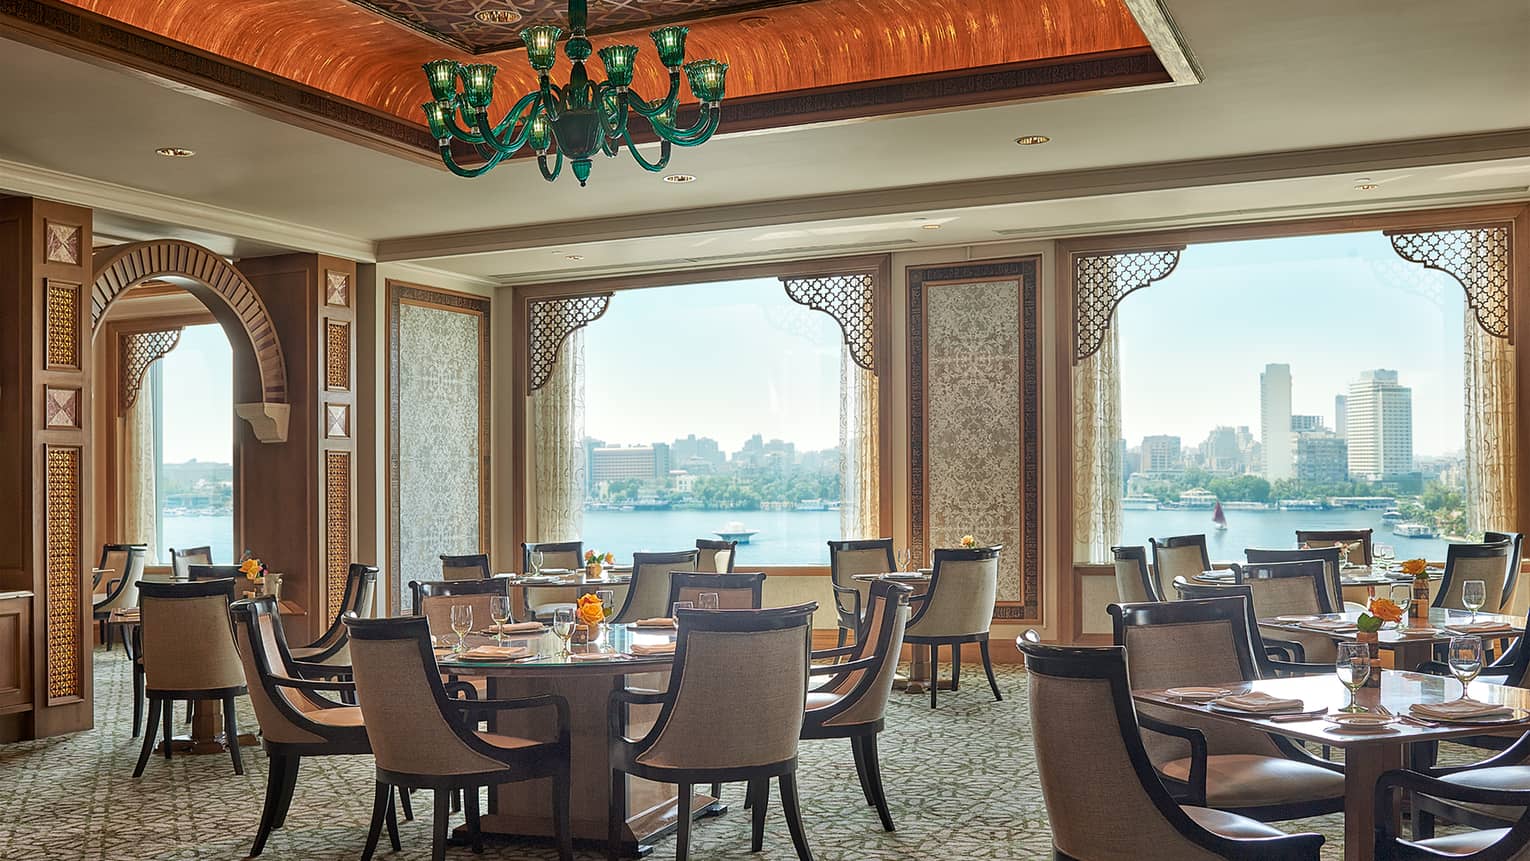 Zitouni Egyptian restaurant dining room tables with high ceilings and windows looking out at Nile river during day